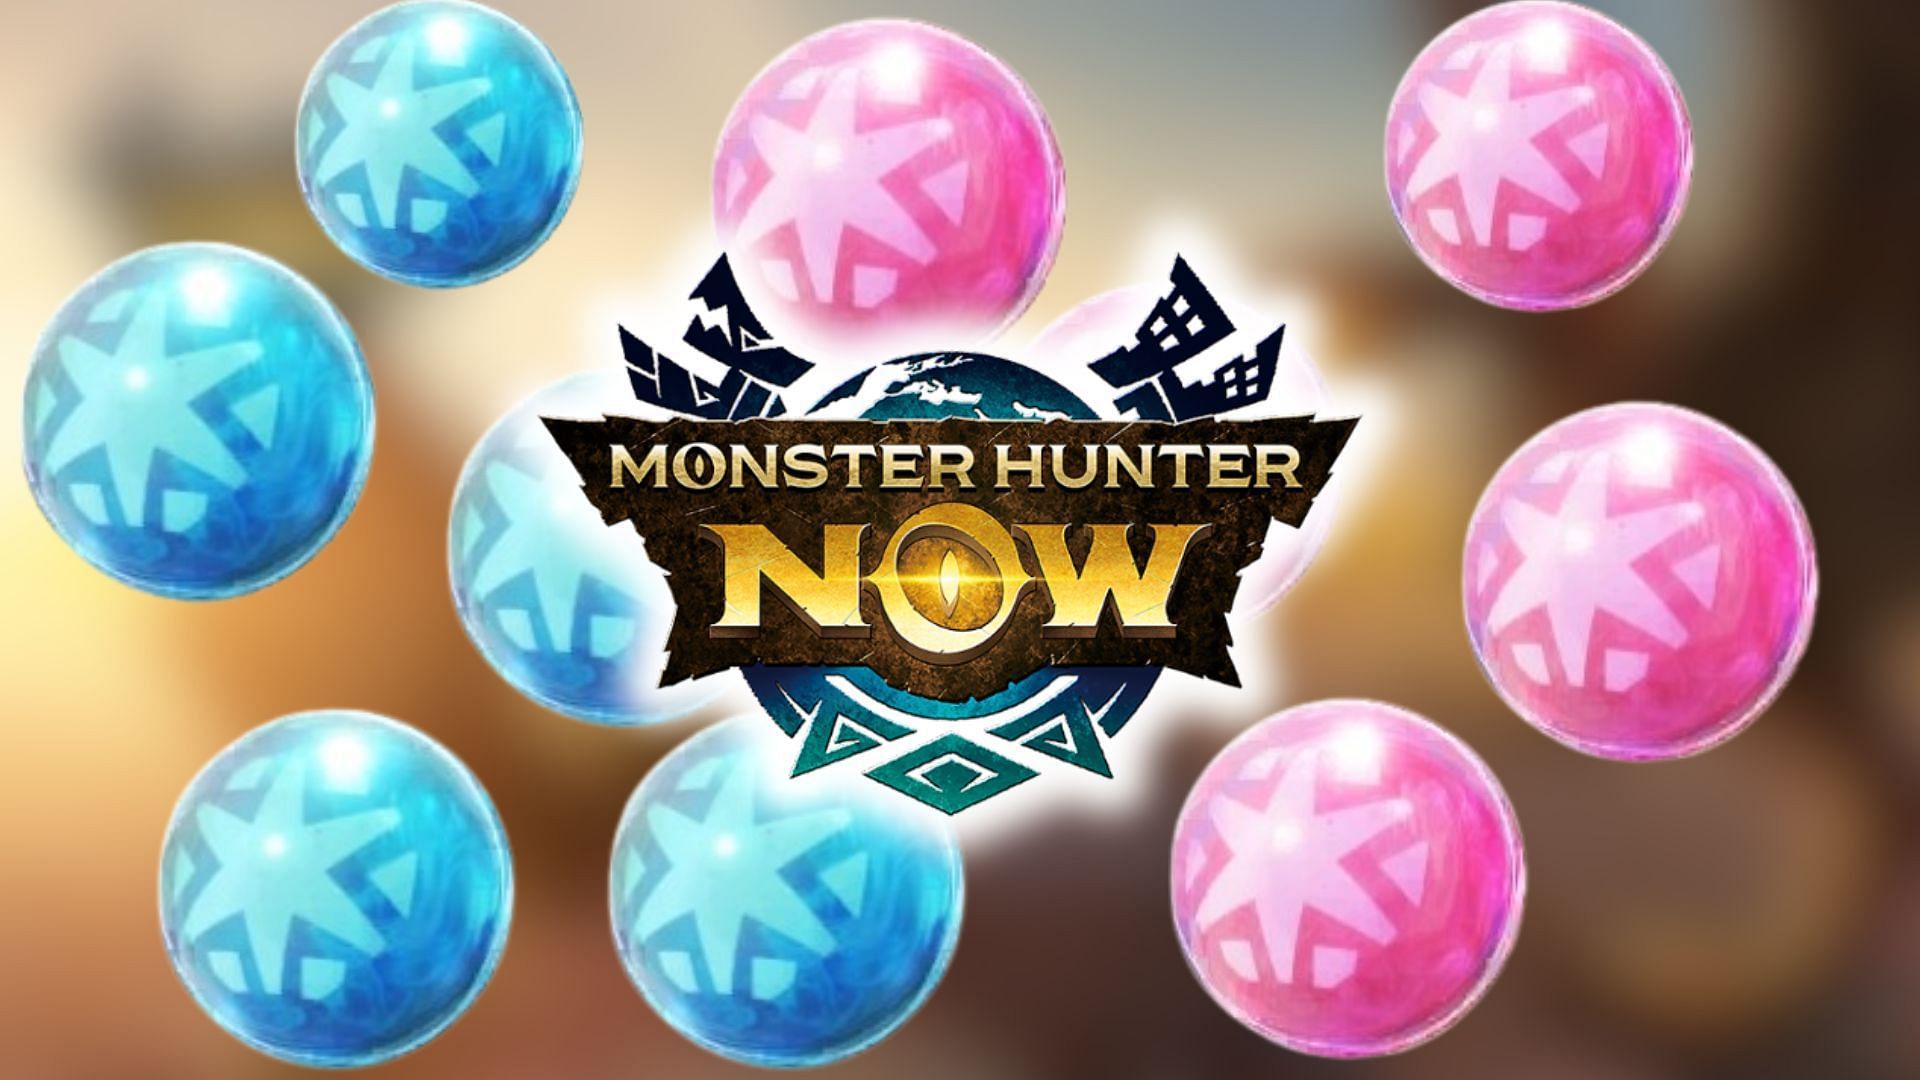 Paintballs can mark large Monster Hunter Now monsters, enabling you to hunt them later (Image via Niantic)